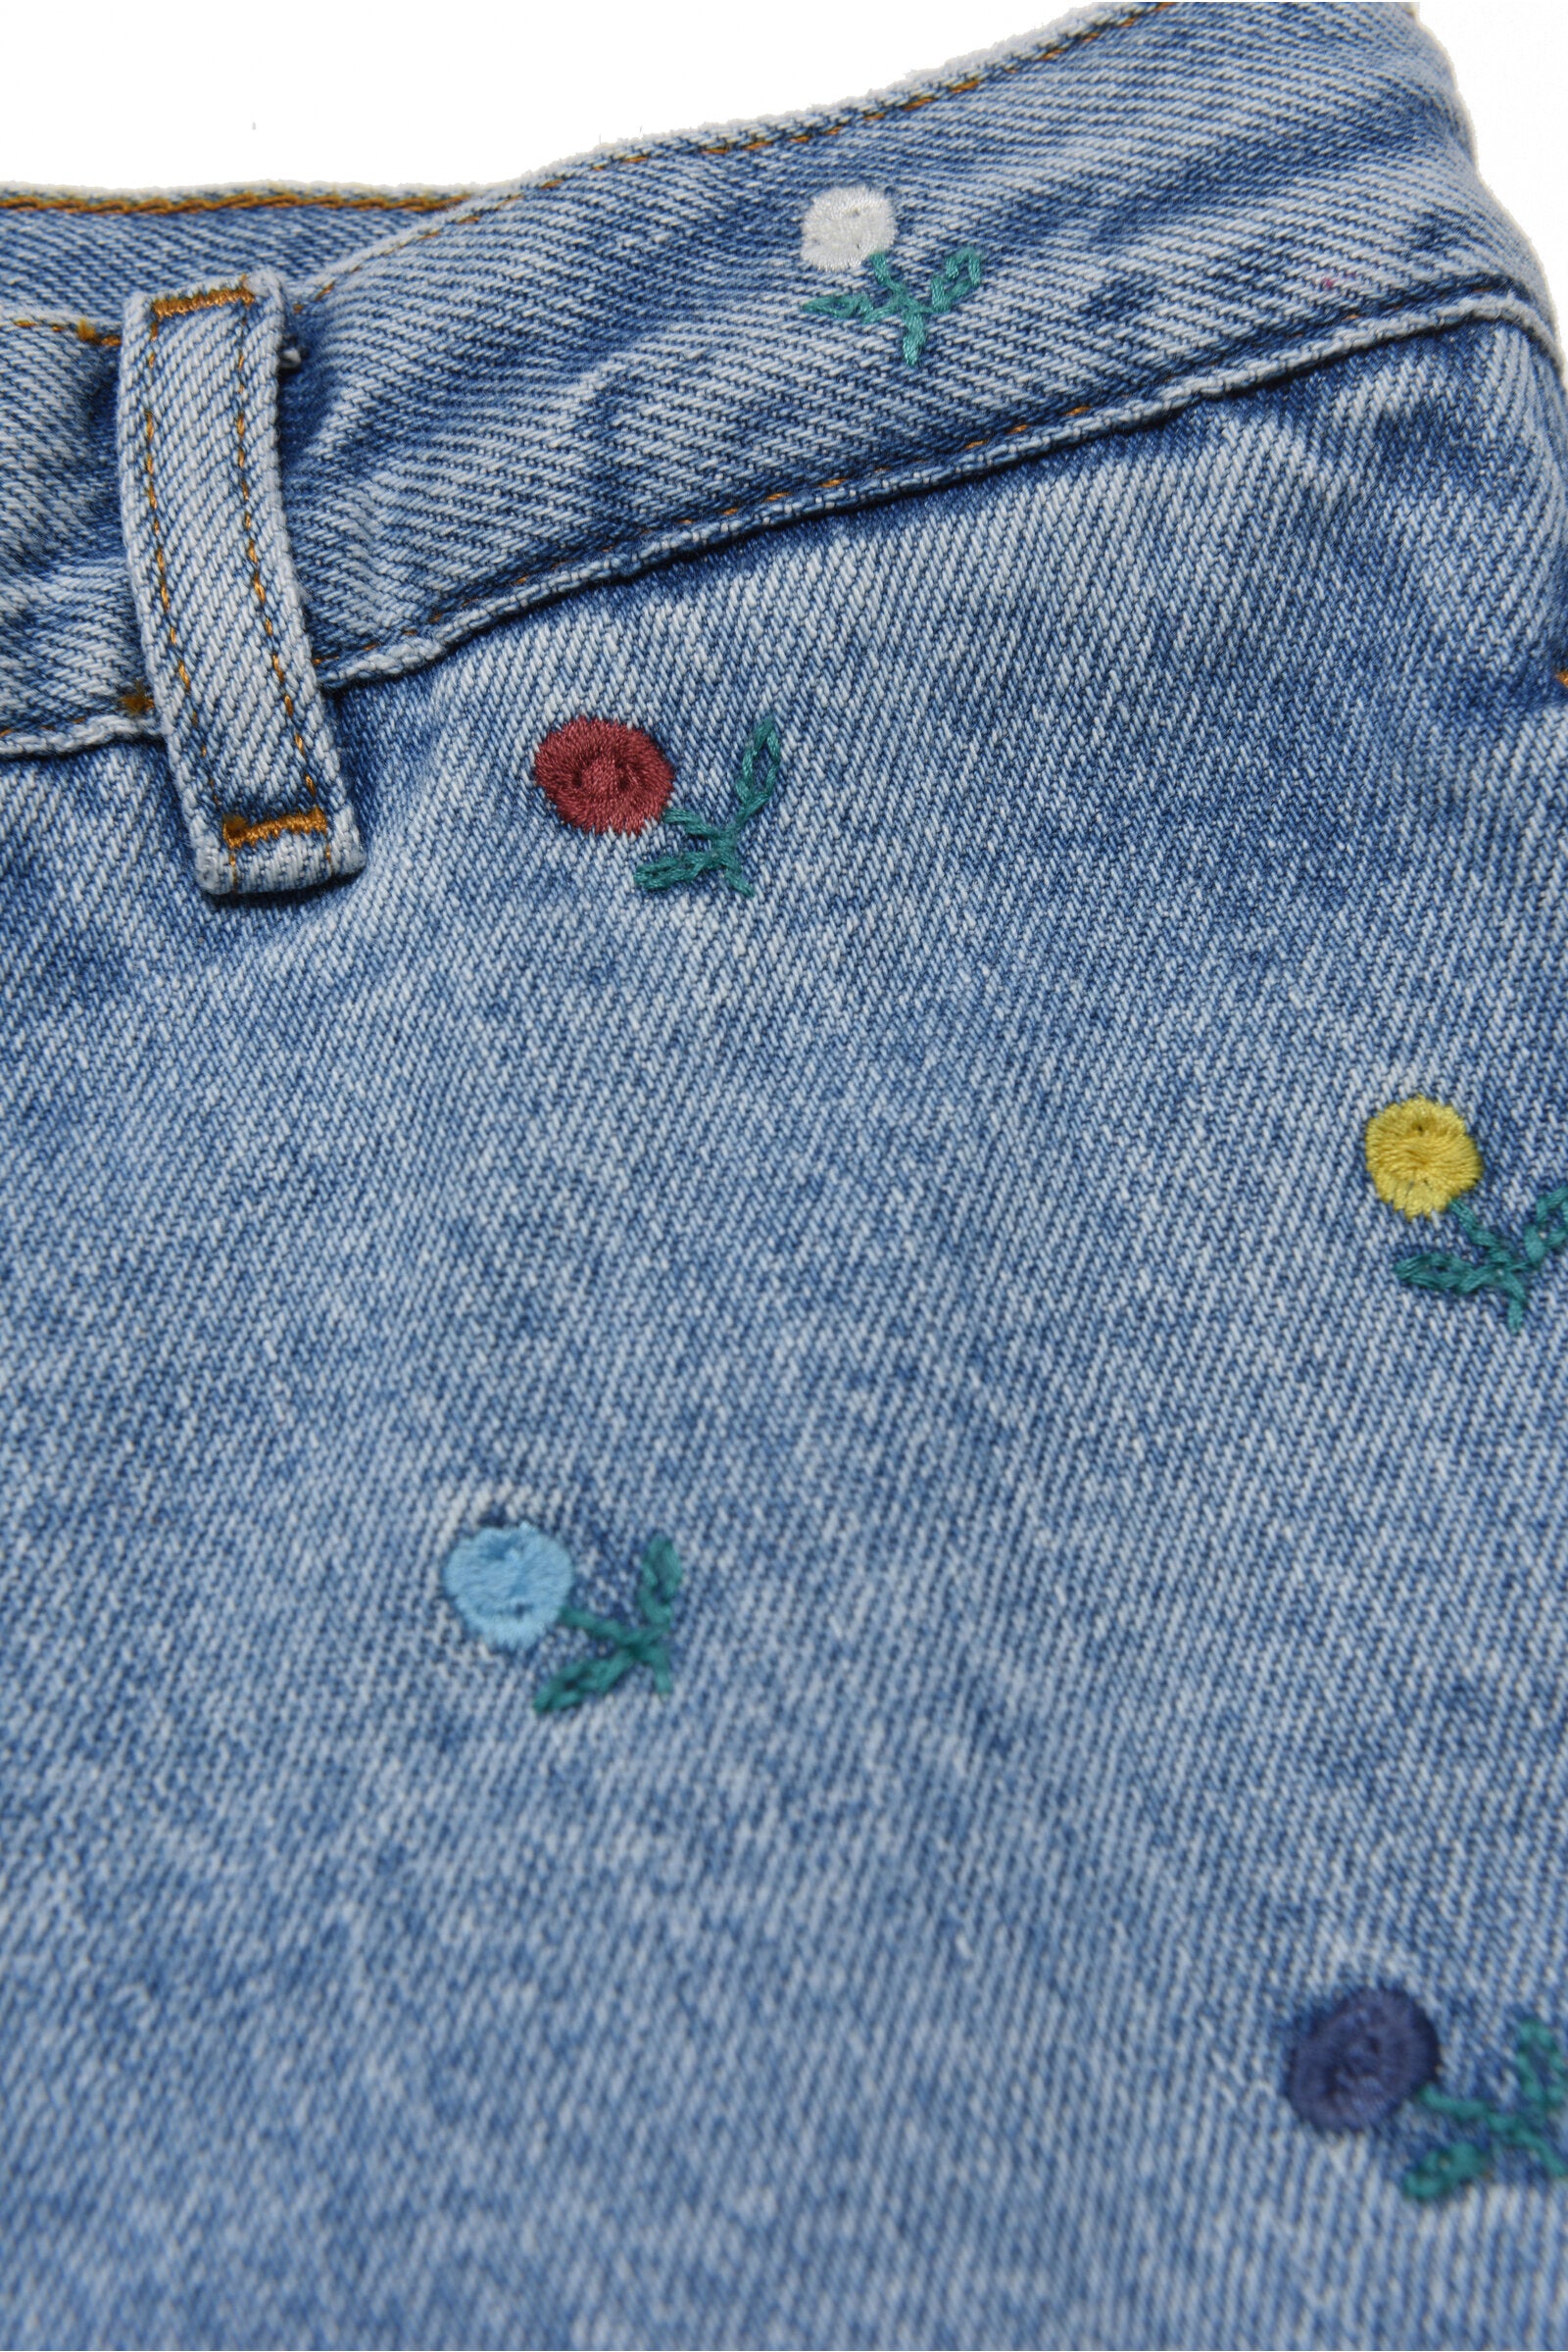 Light blue jeans pants with embroidered flowers and patch